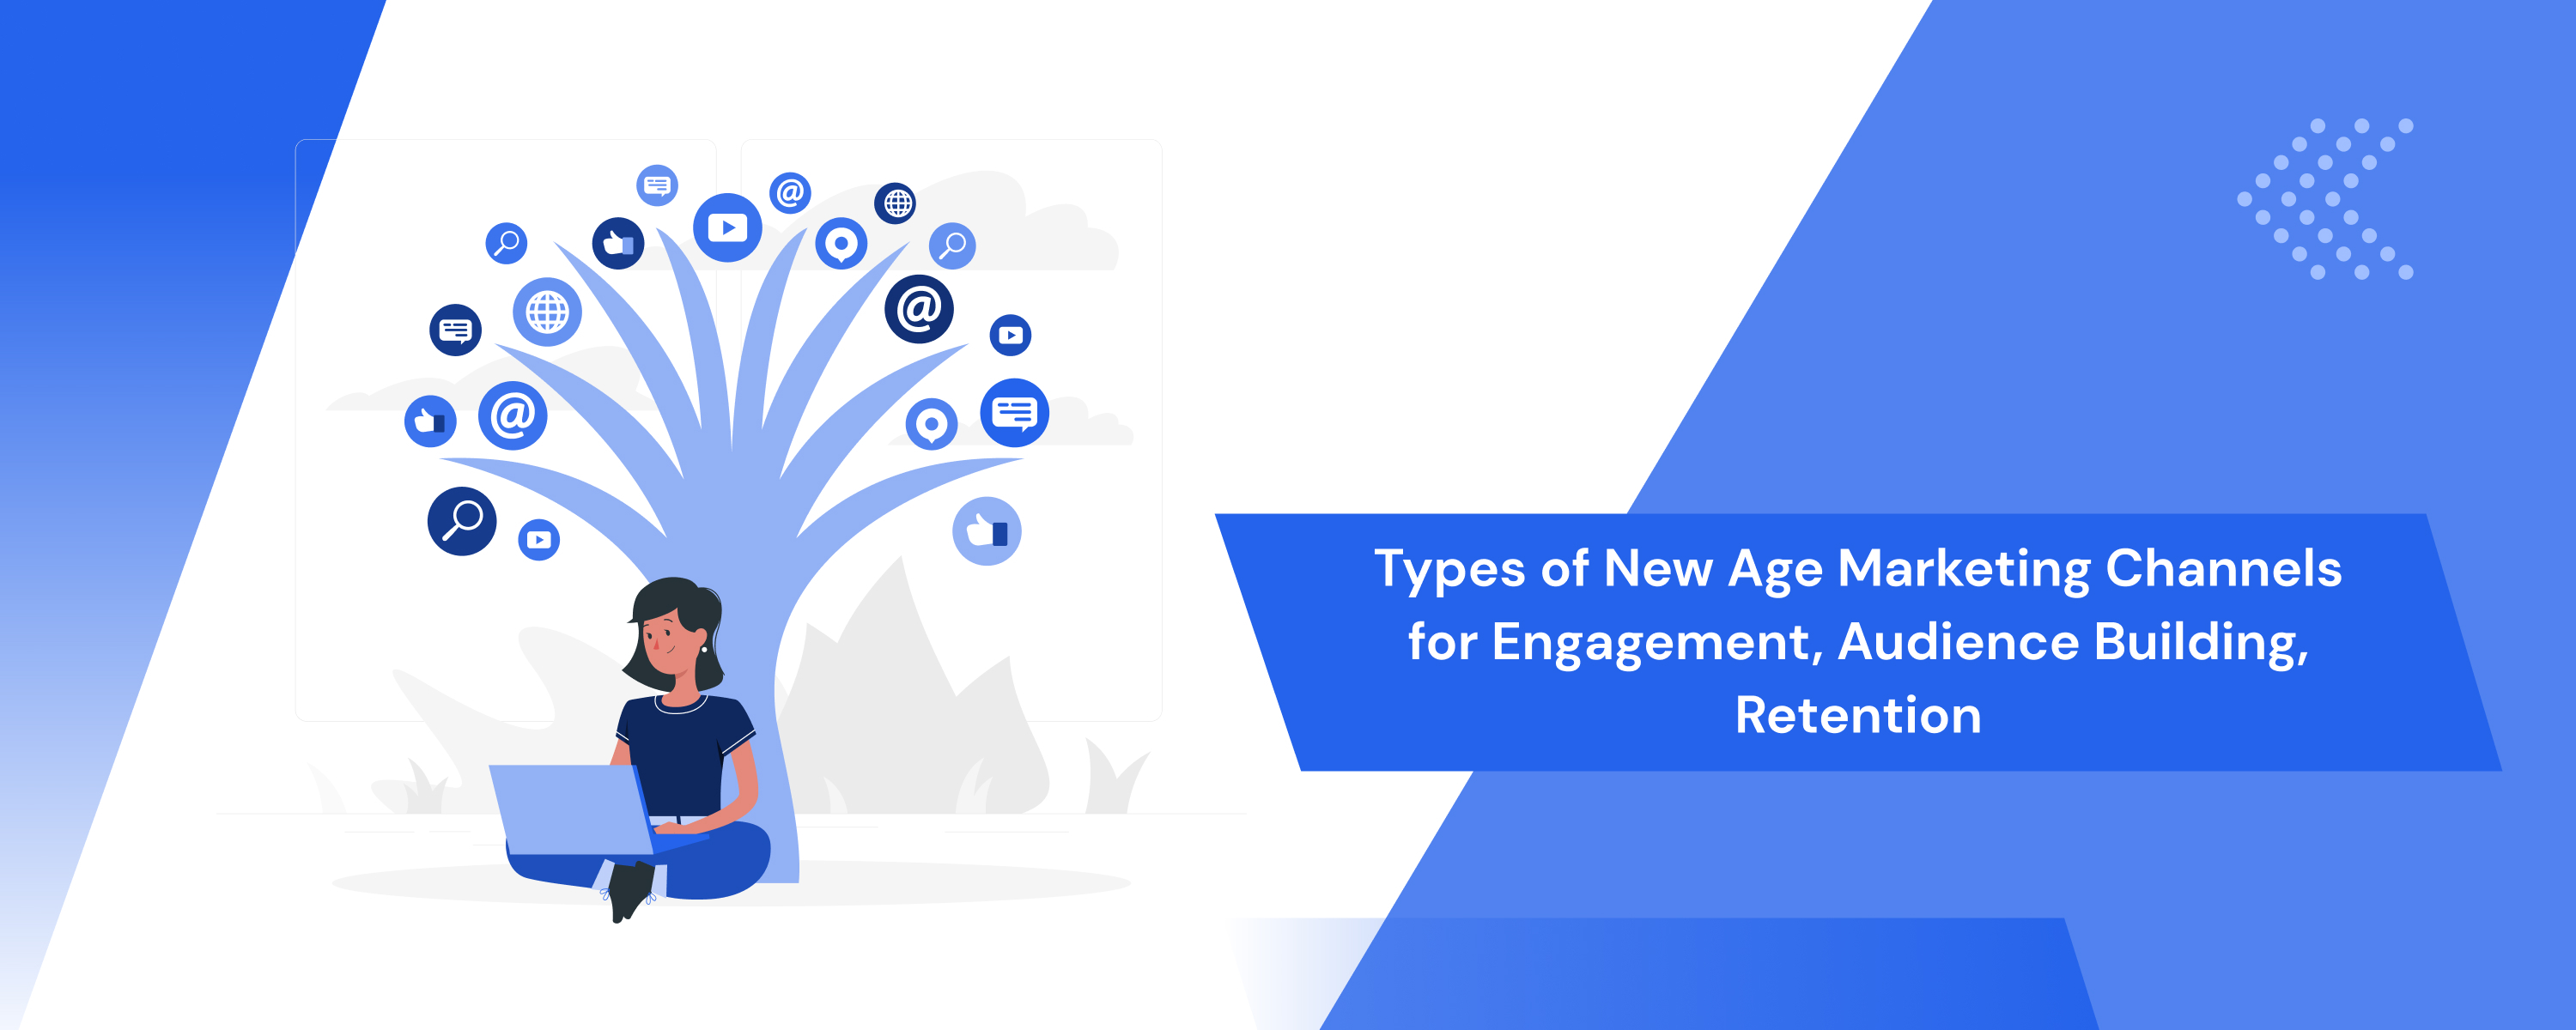 Types of New Age Marketing Channels for More Engagement and Retention